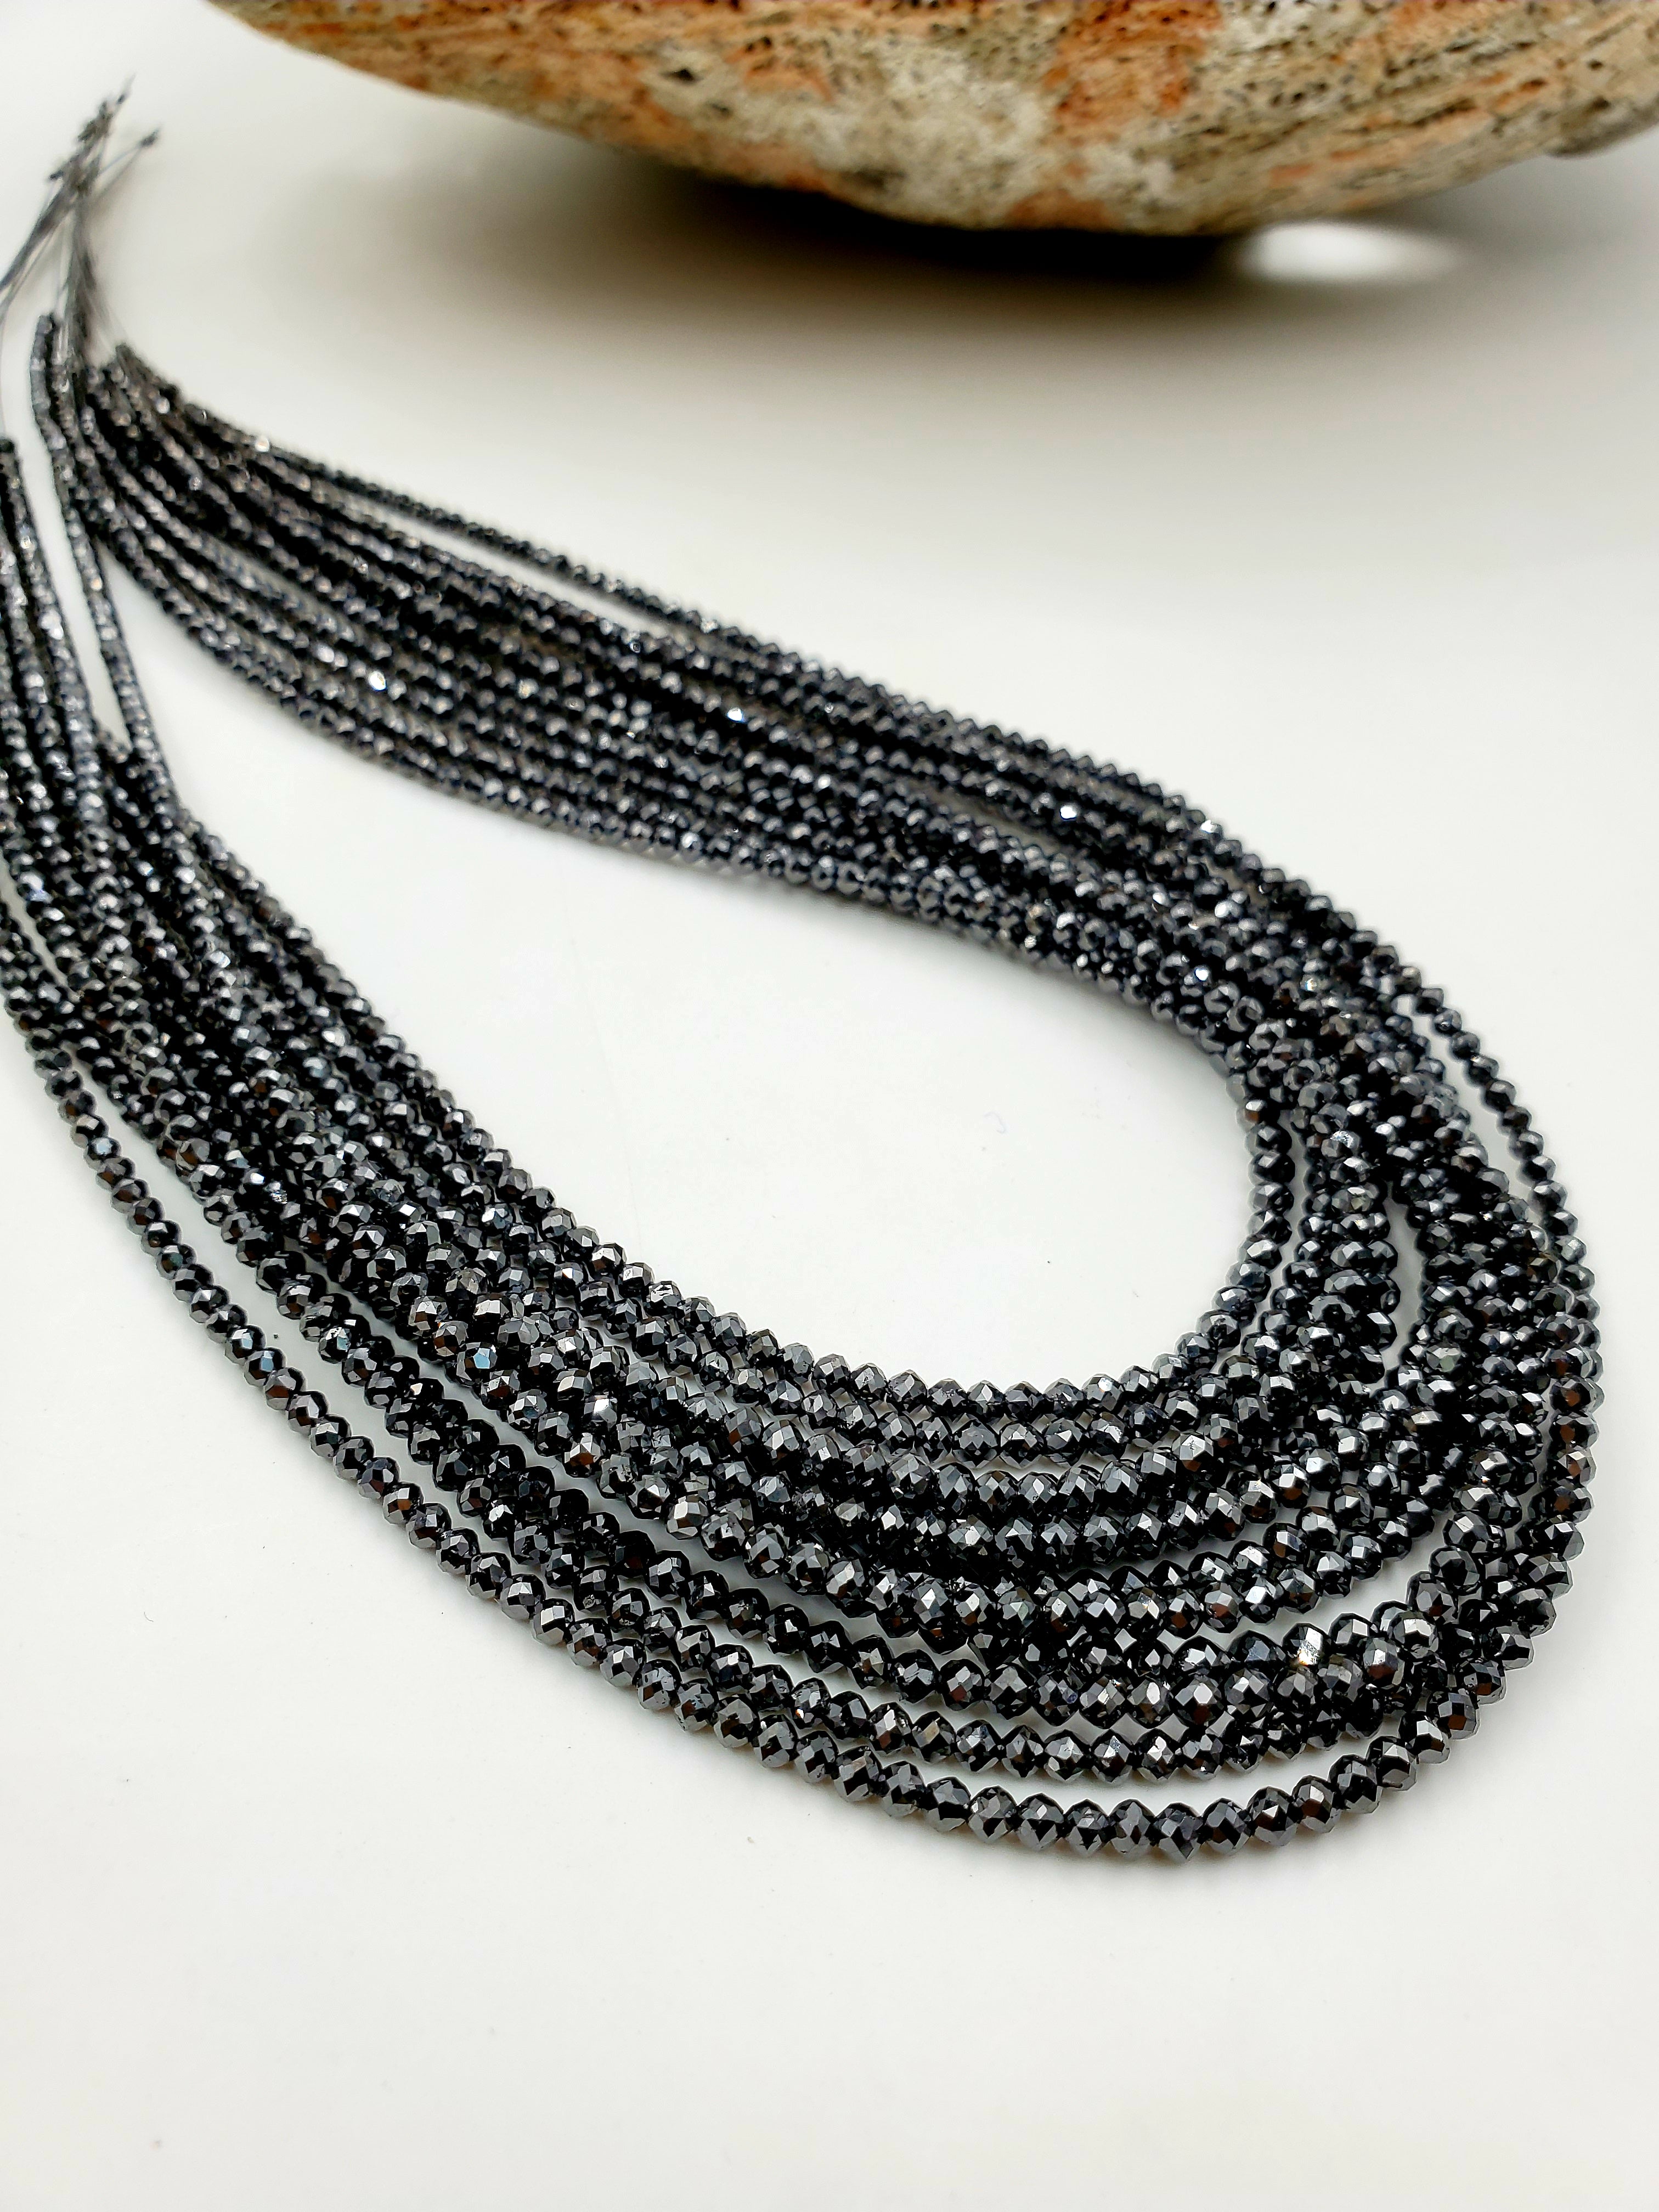 20 Inch. Natural Black Diamond Faceted Beads Necklace at Rs 17,000 / Carat  in Surat